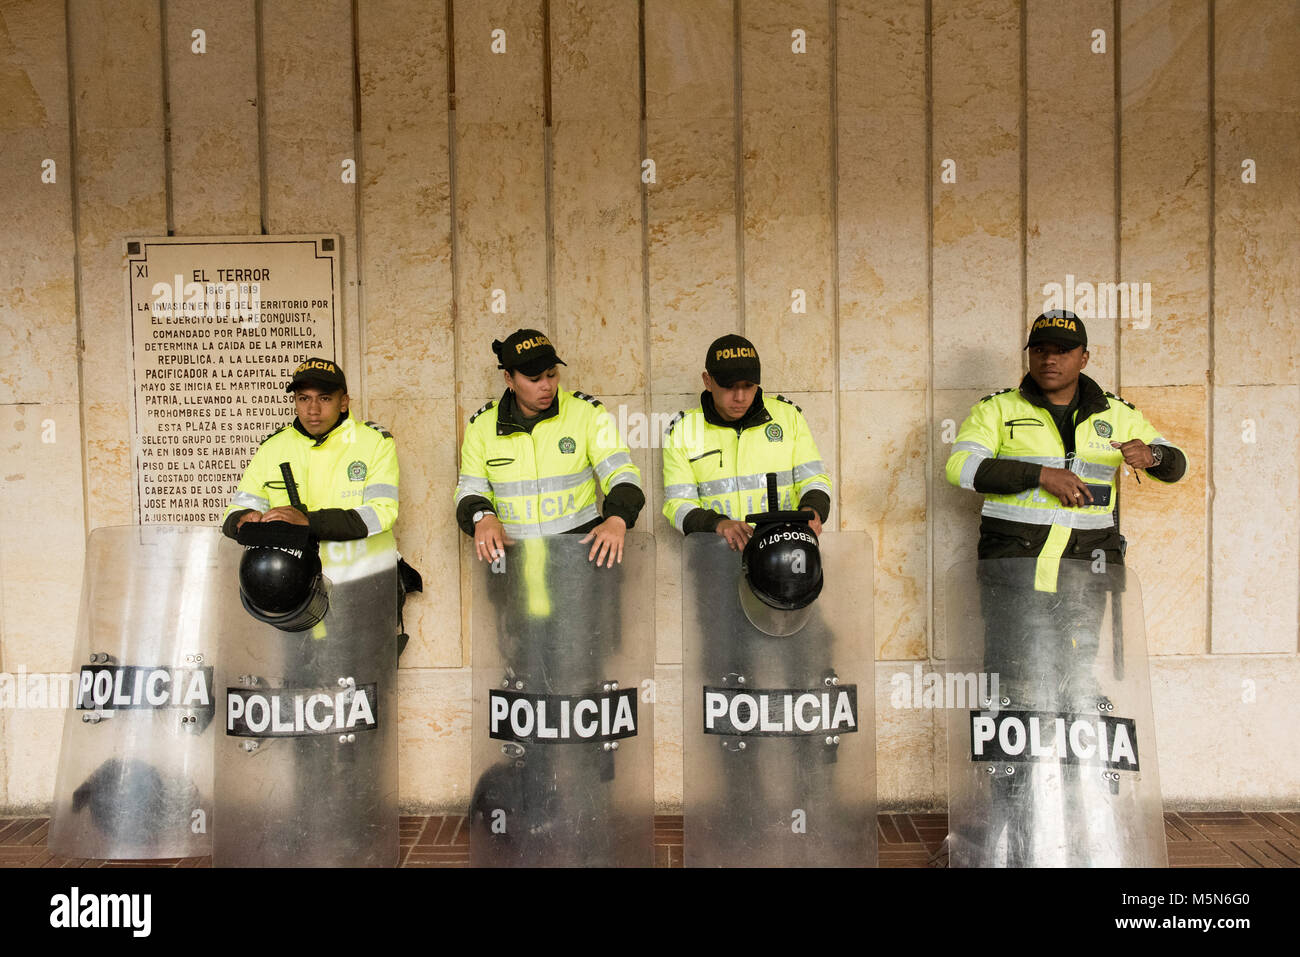 Police with riot gear rest outside municipal buildings in Simon Bolivar Square, Colombia Stock Photo